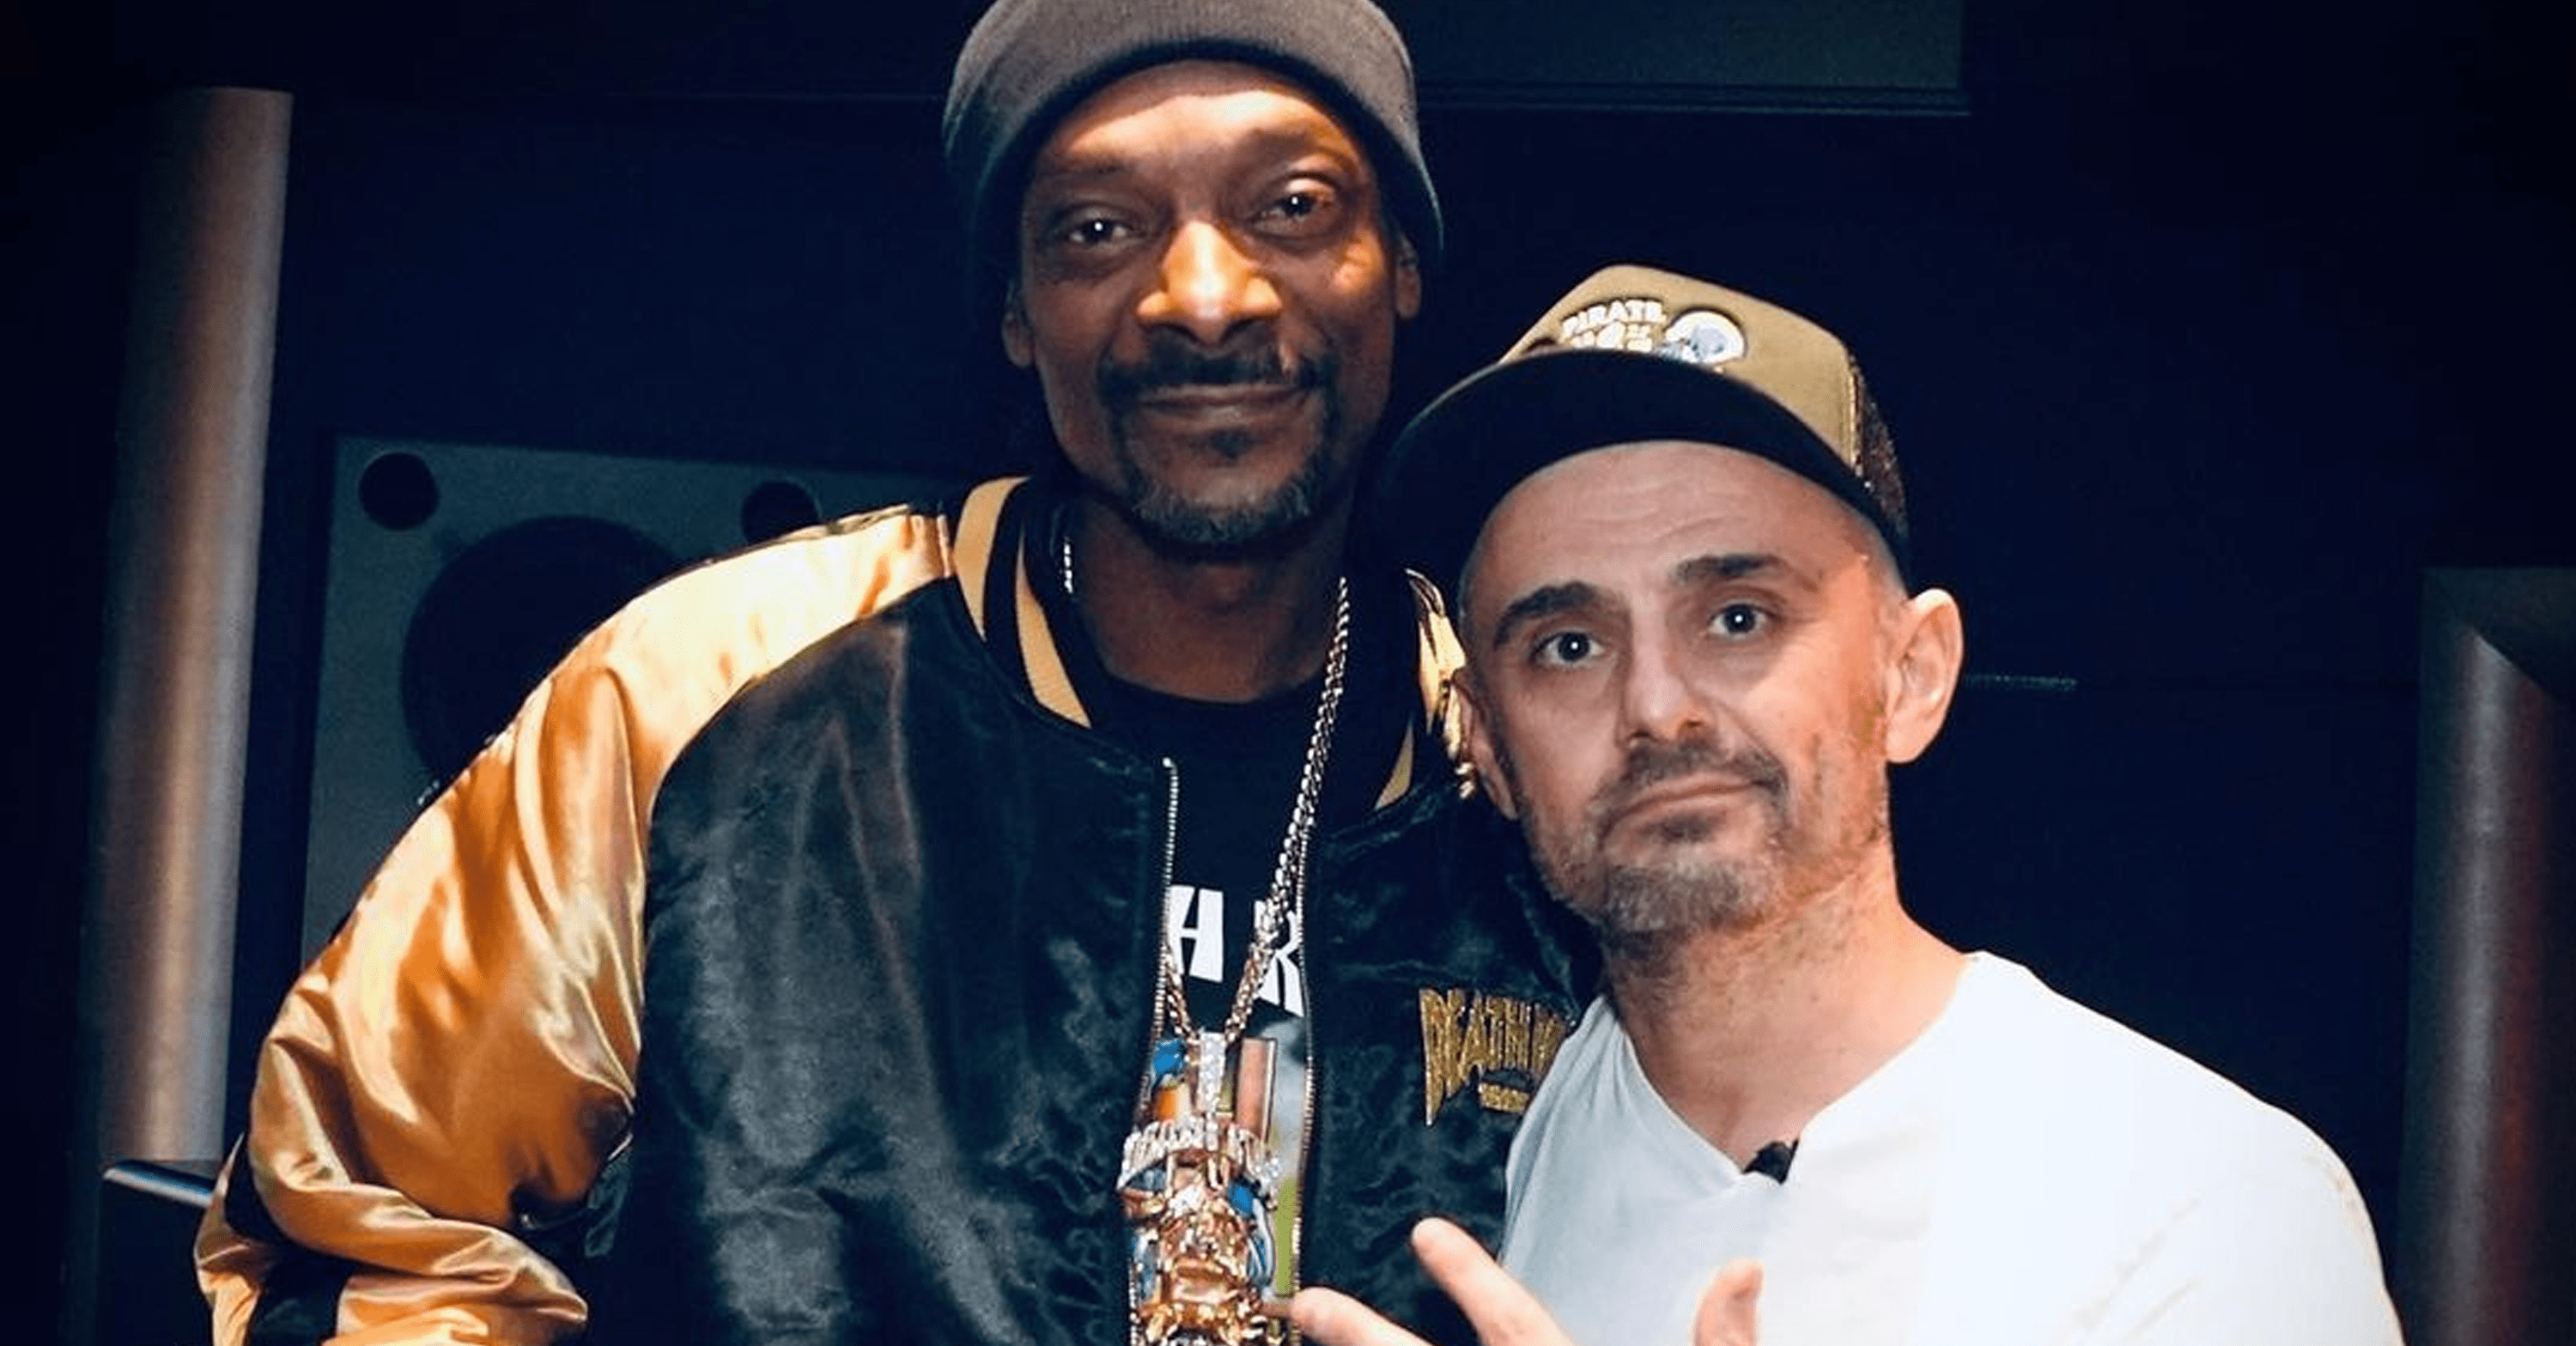 Snoop Dogg And Gary Vee Win Ownership Of Basketball Teams In Ice Cube’s BIG3 League Through NFTs